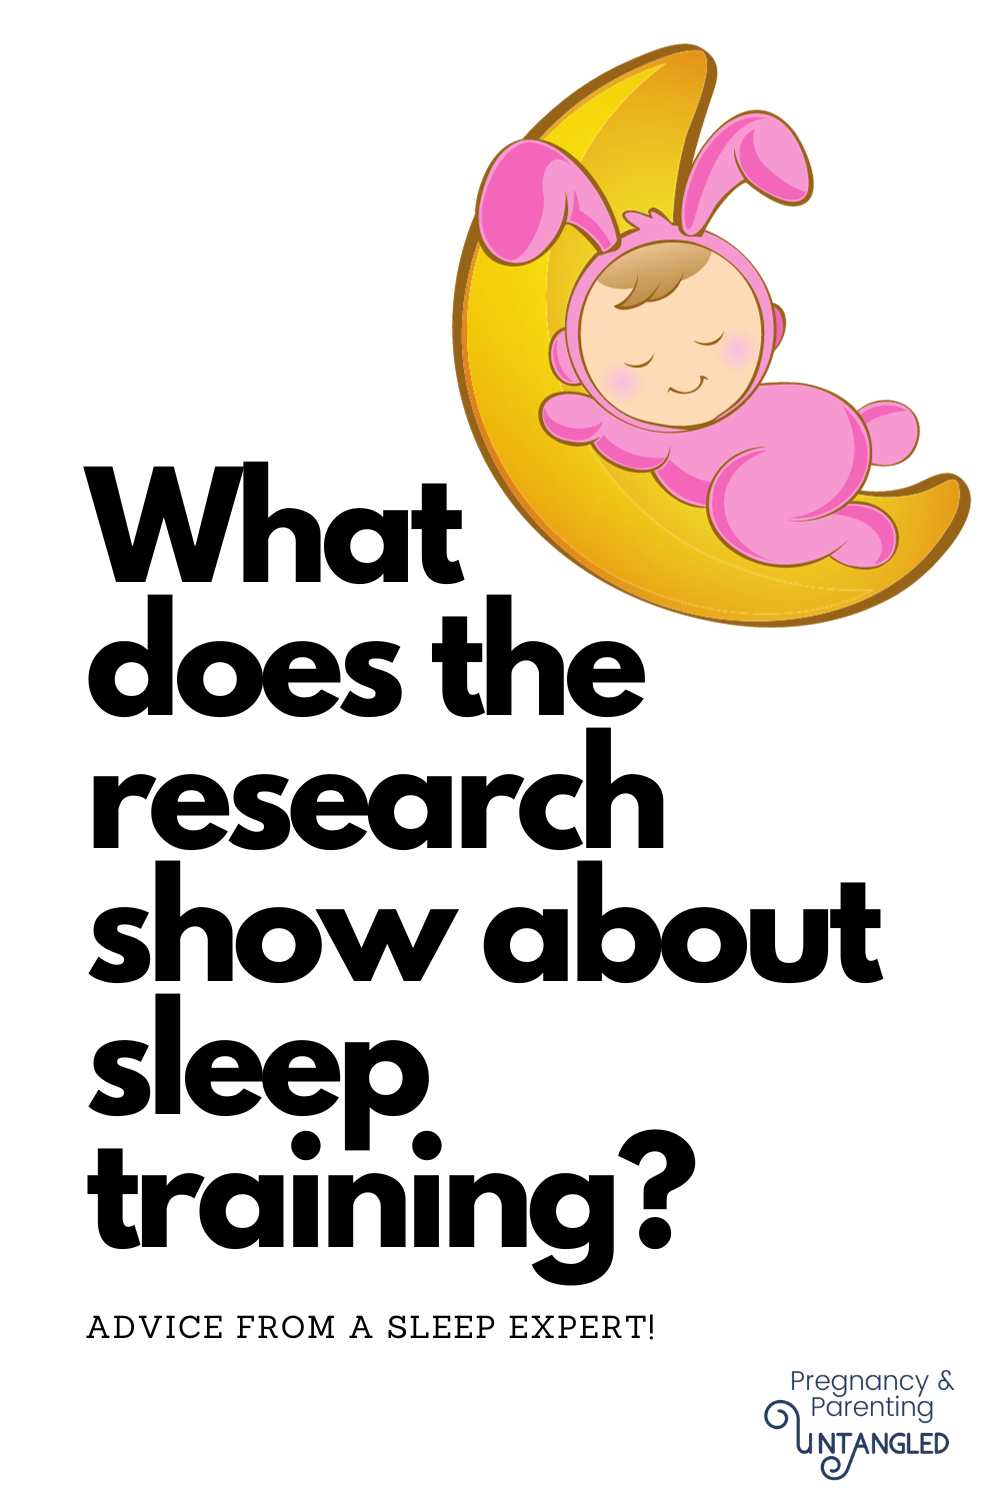 Unlock the secrets of a good night's sleep for both you and your baby with expert sleep advice from Sujay Kansagra, a double board-certified doctor in child neurology and sleep medicine. Discover evidence-based strategies for baby sleep training, including the four core methods supported by research: extinction, graduated extinction, camping out, and scheduled awakenings. Find out how these methods can promote safe and effective sleep for both babies and parents. via @pullingcurls